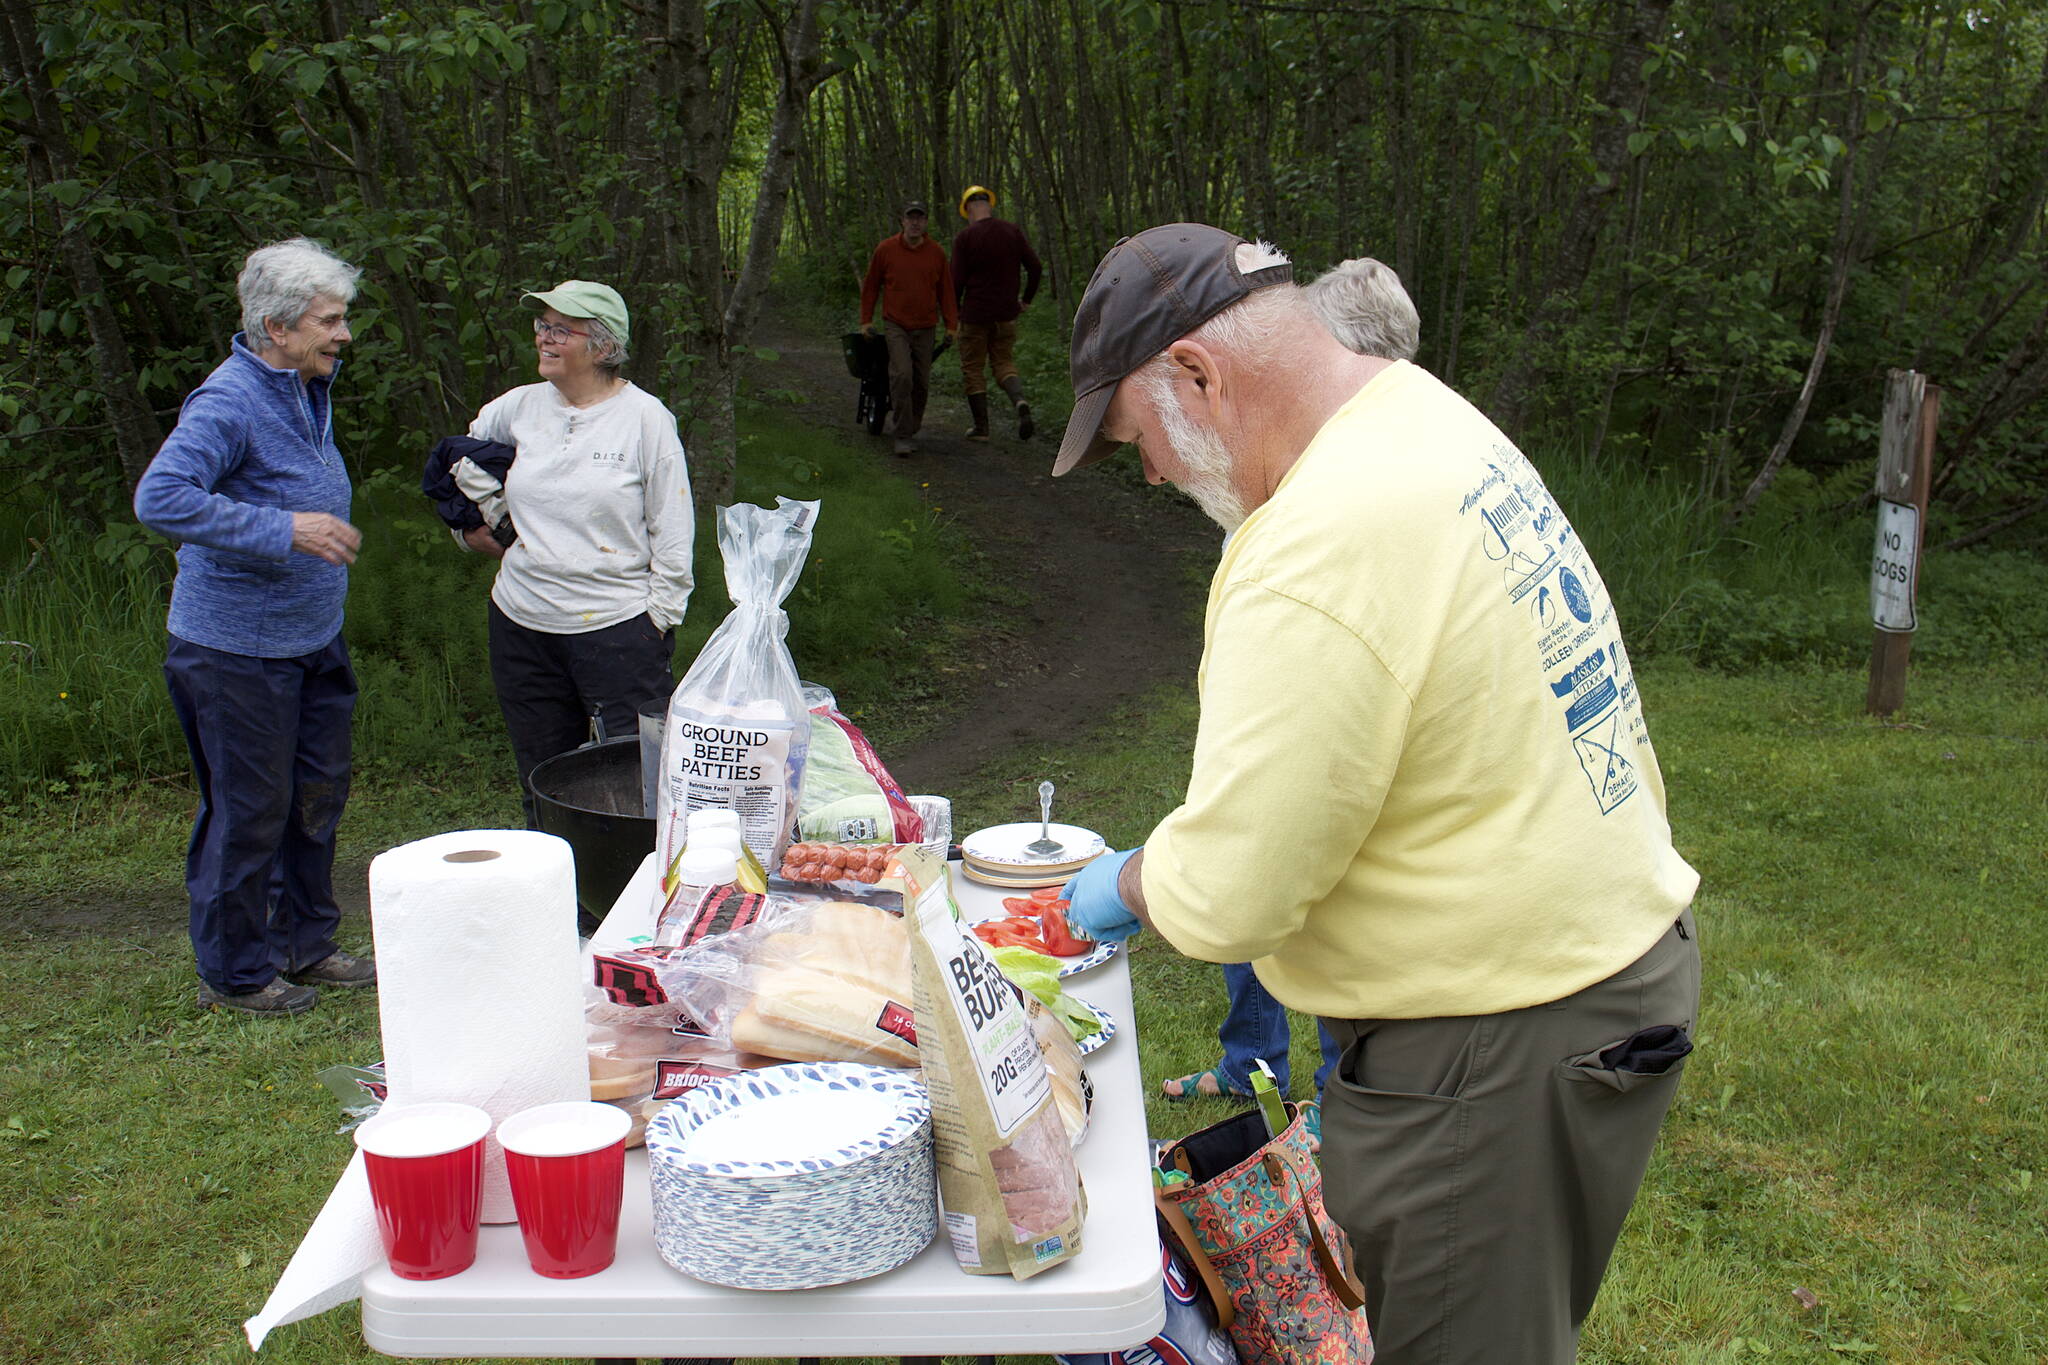 Trail Mix Vice President Ron Bressette prepares fixings for a cookout for workers who spent Saturday morning improving the Kingfisher Pond Loop Trail. (Mark Sabatini / Juneau Empire)